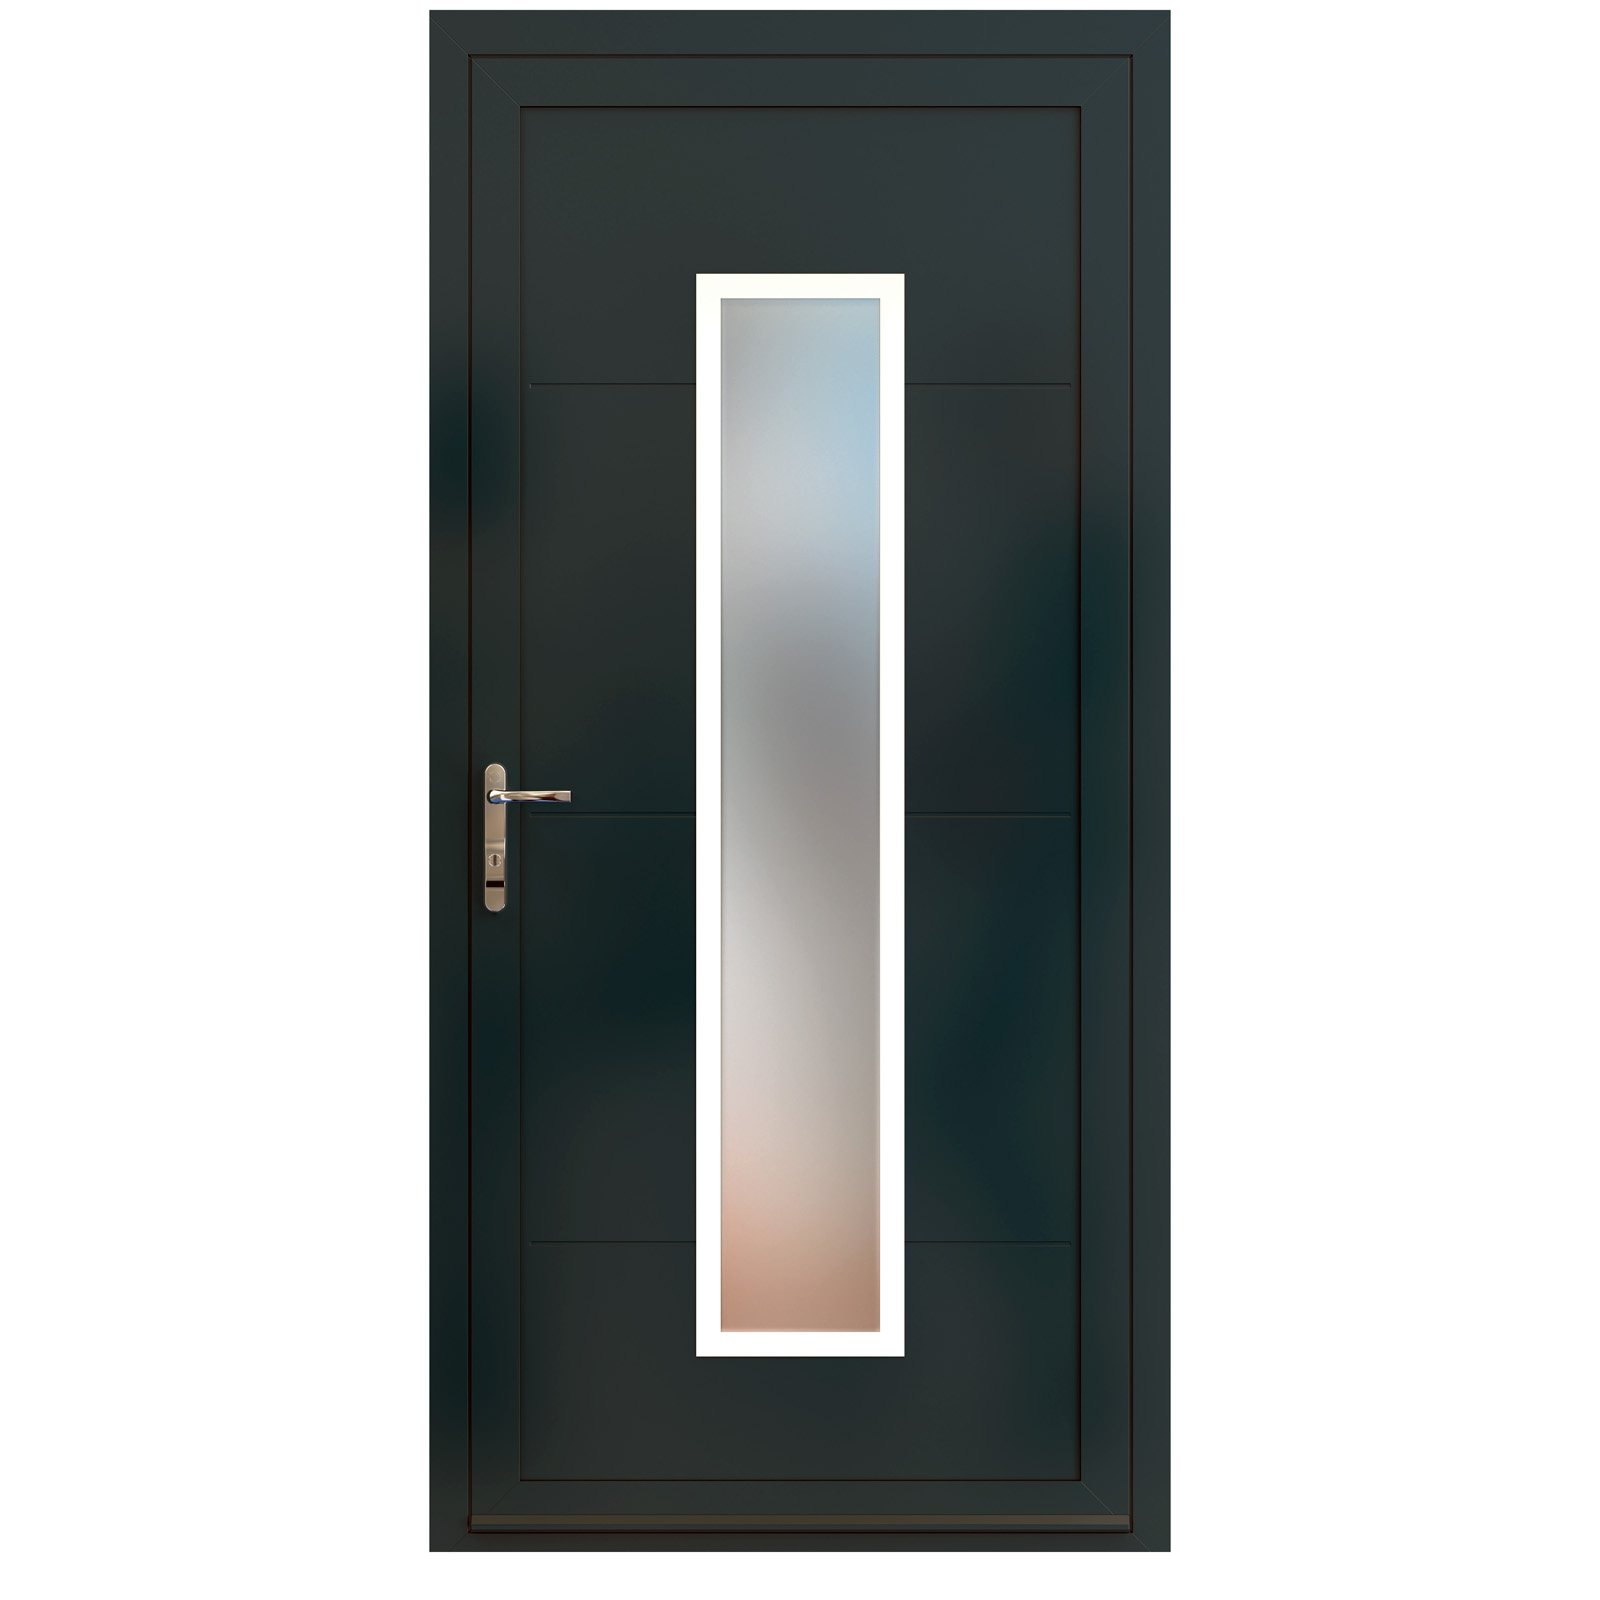 Alitherm 400 Door with PM0001T +Frame